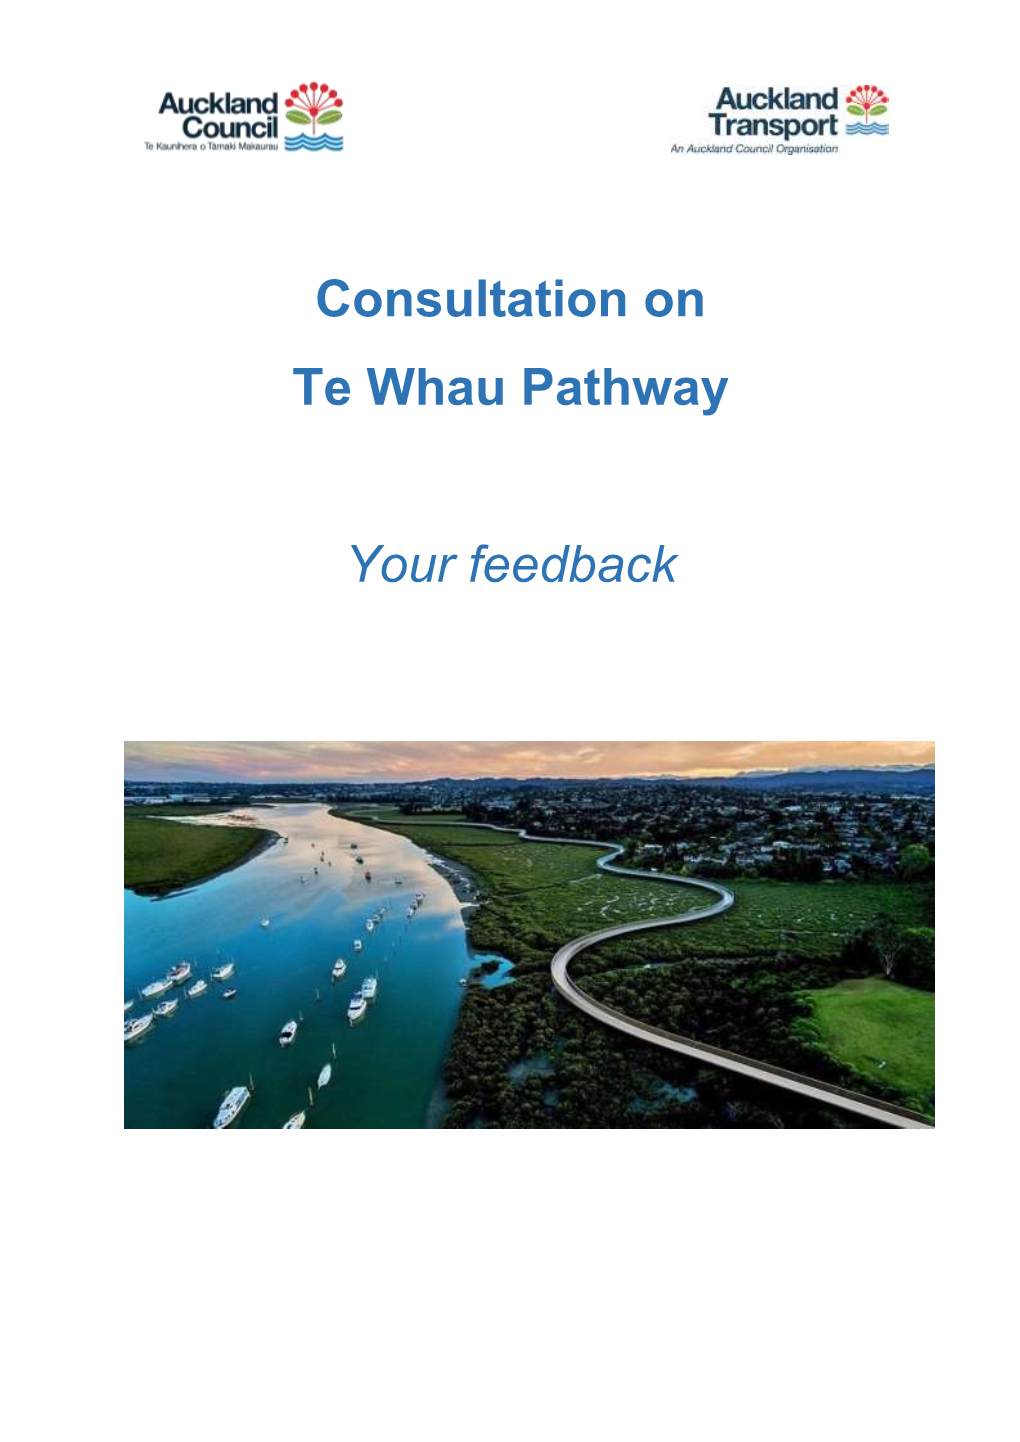 Consultation on Te Whau Pathway Your Feedback